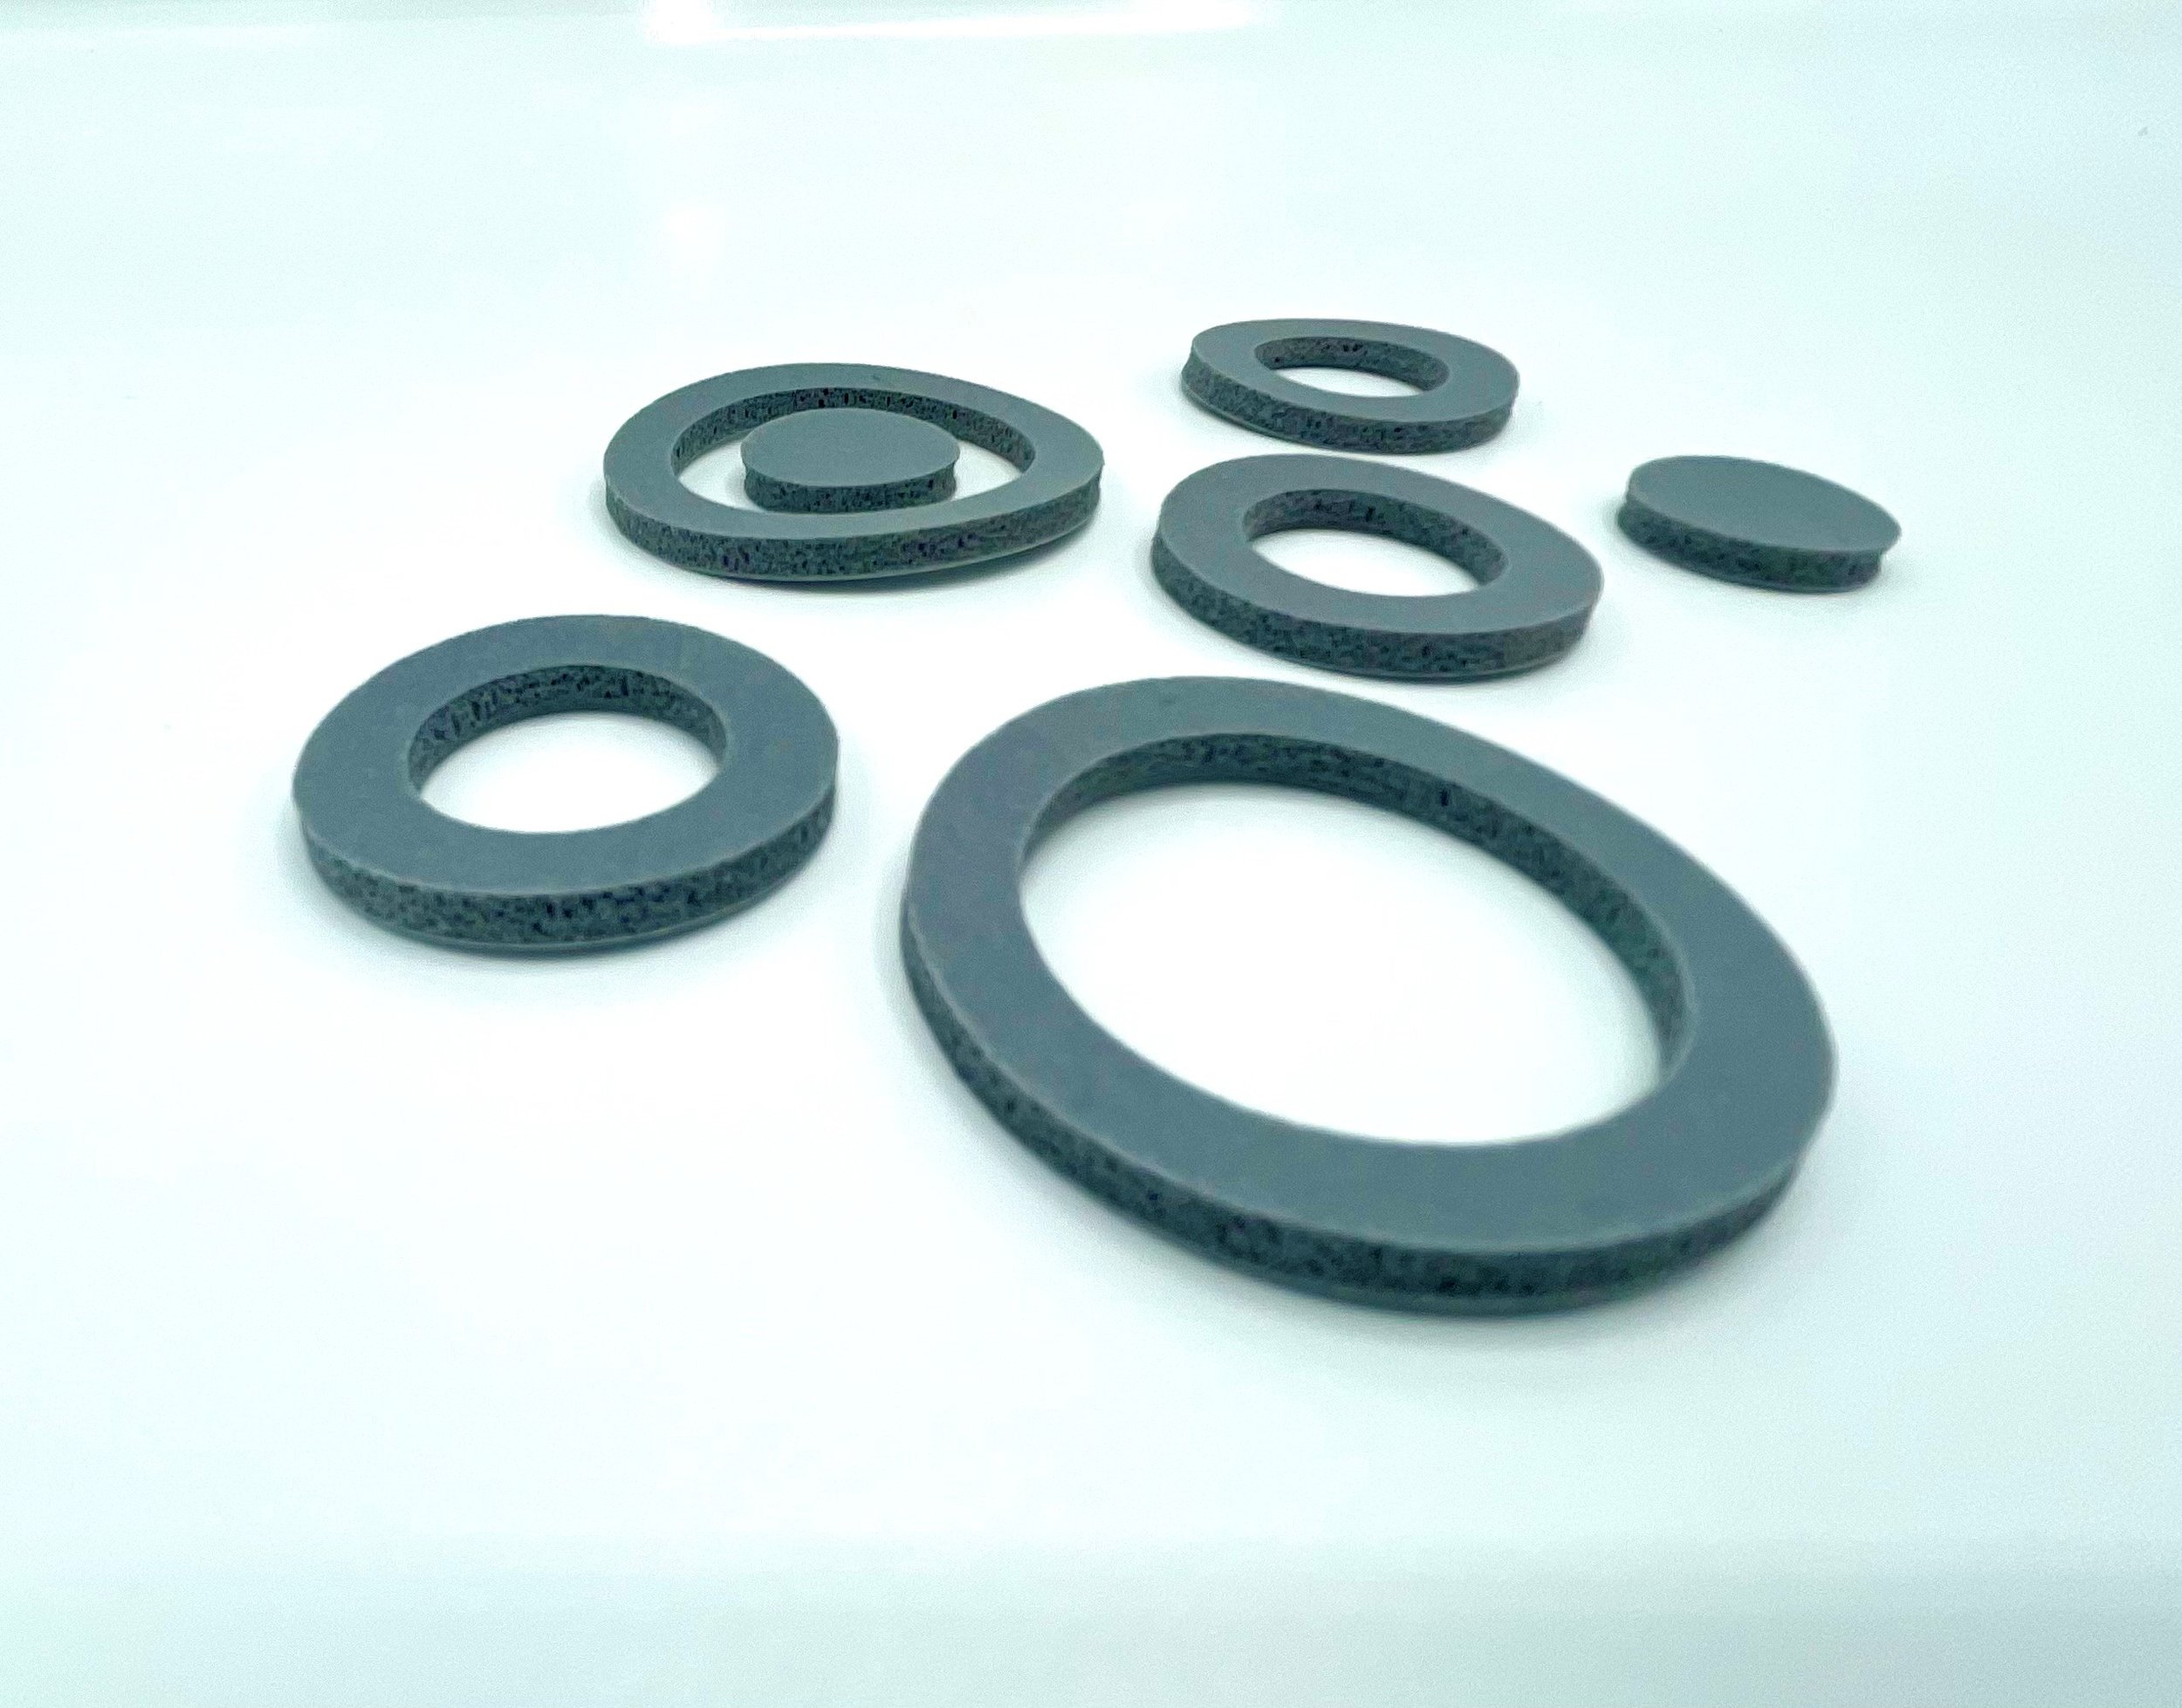 How Does Silicone Rubber Differ From Regular Rubber?